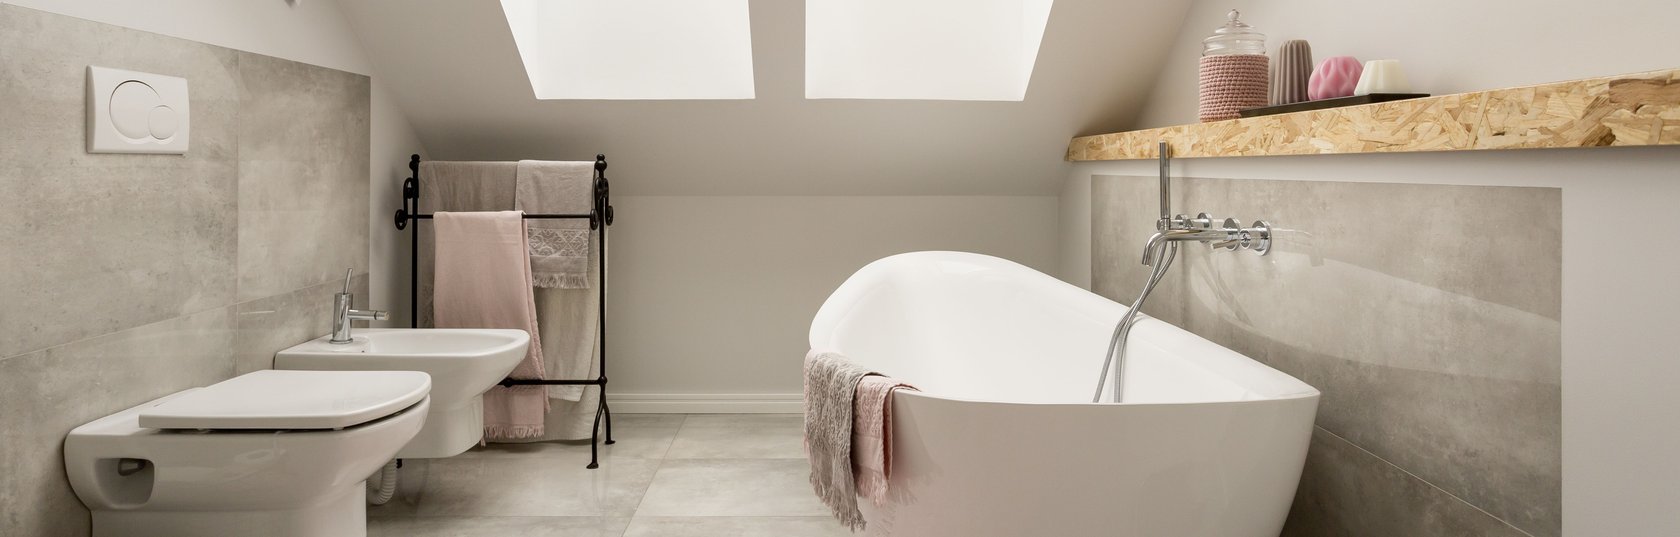 7 small bathroom ideas that are simple and stylish